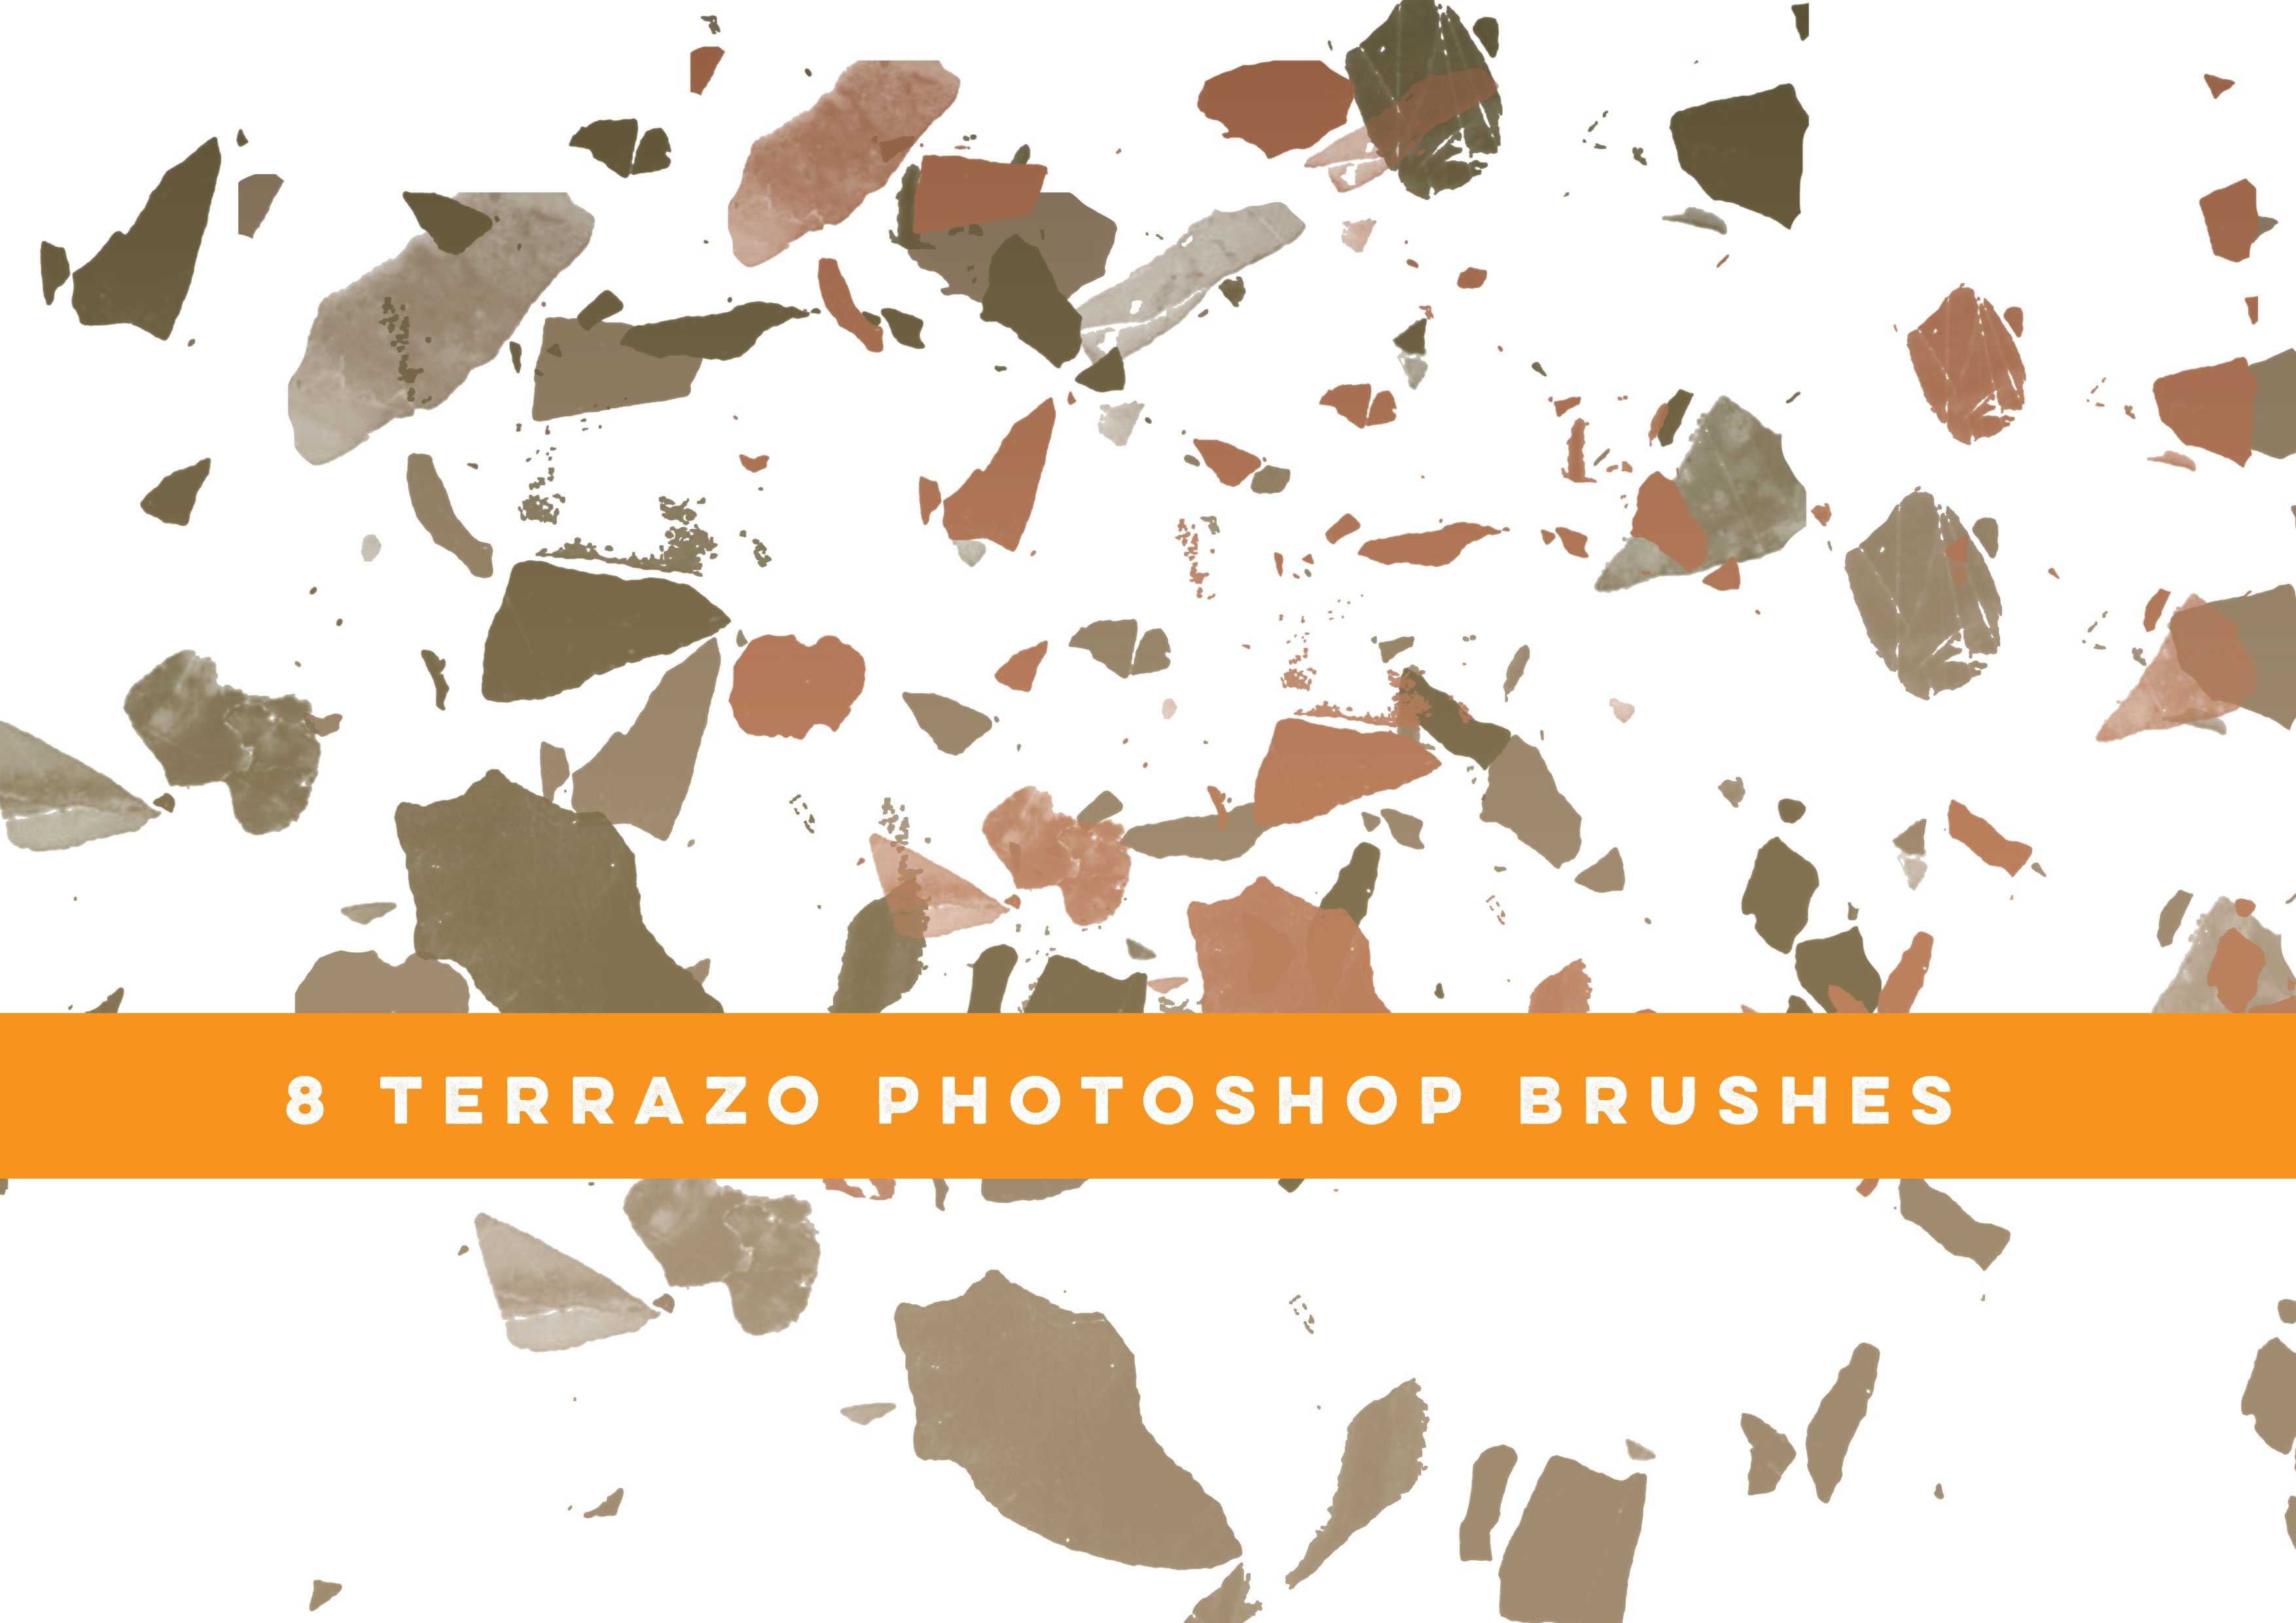 seesee terrazo brushes4 993